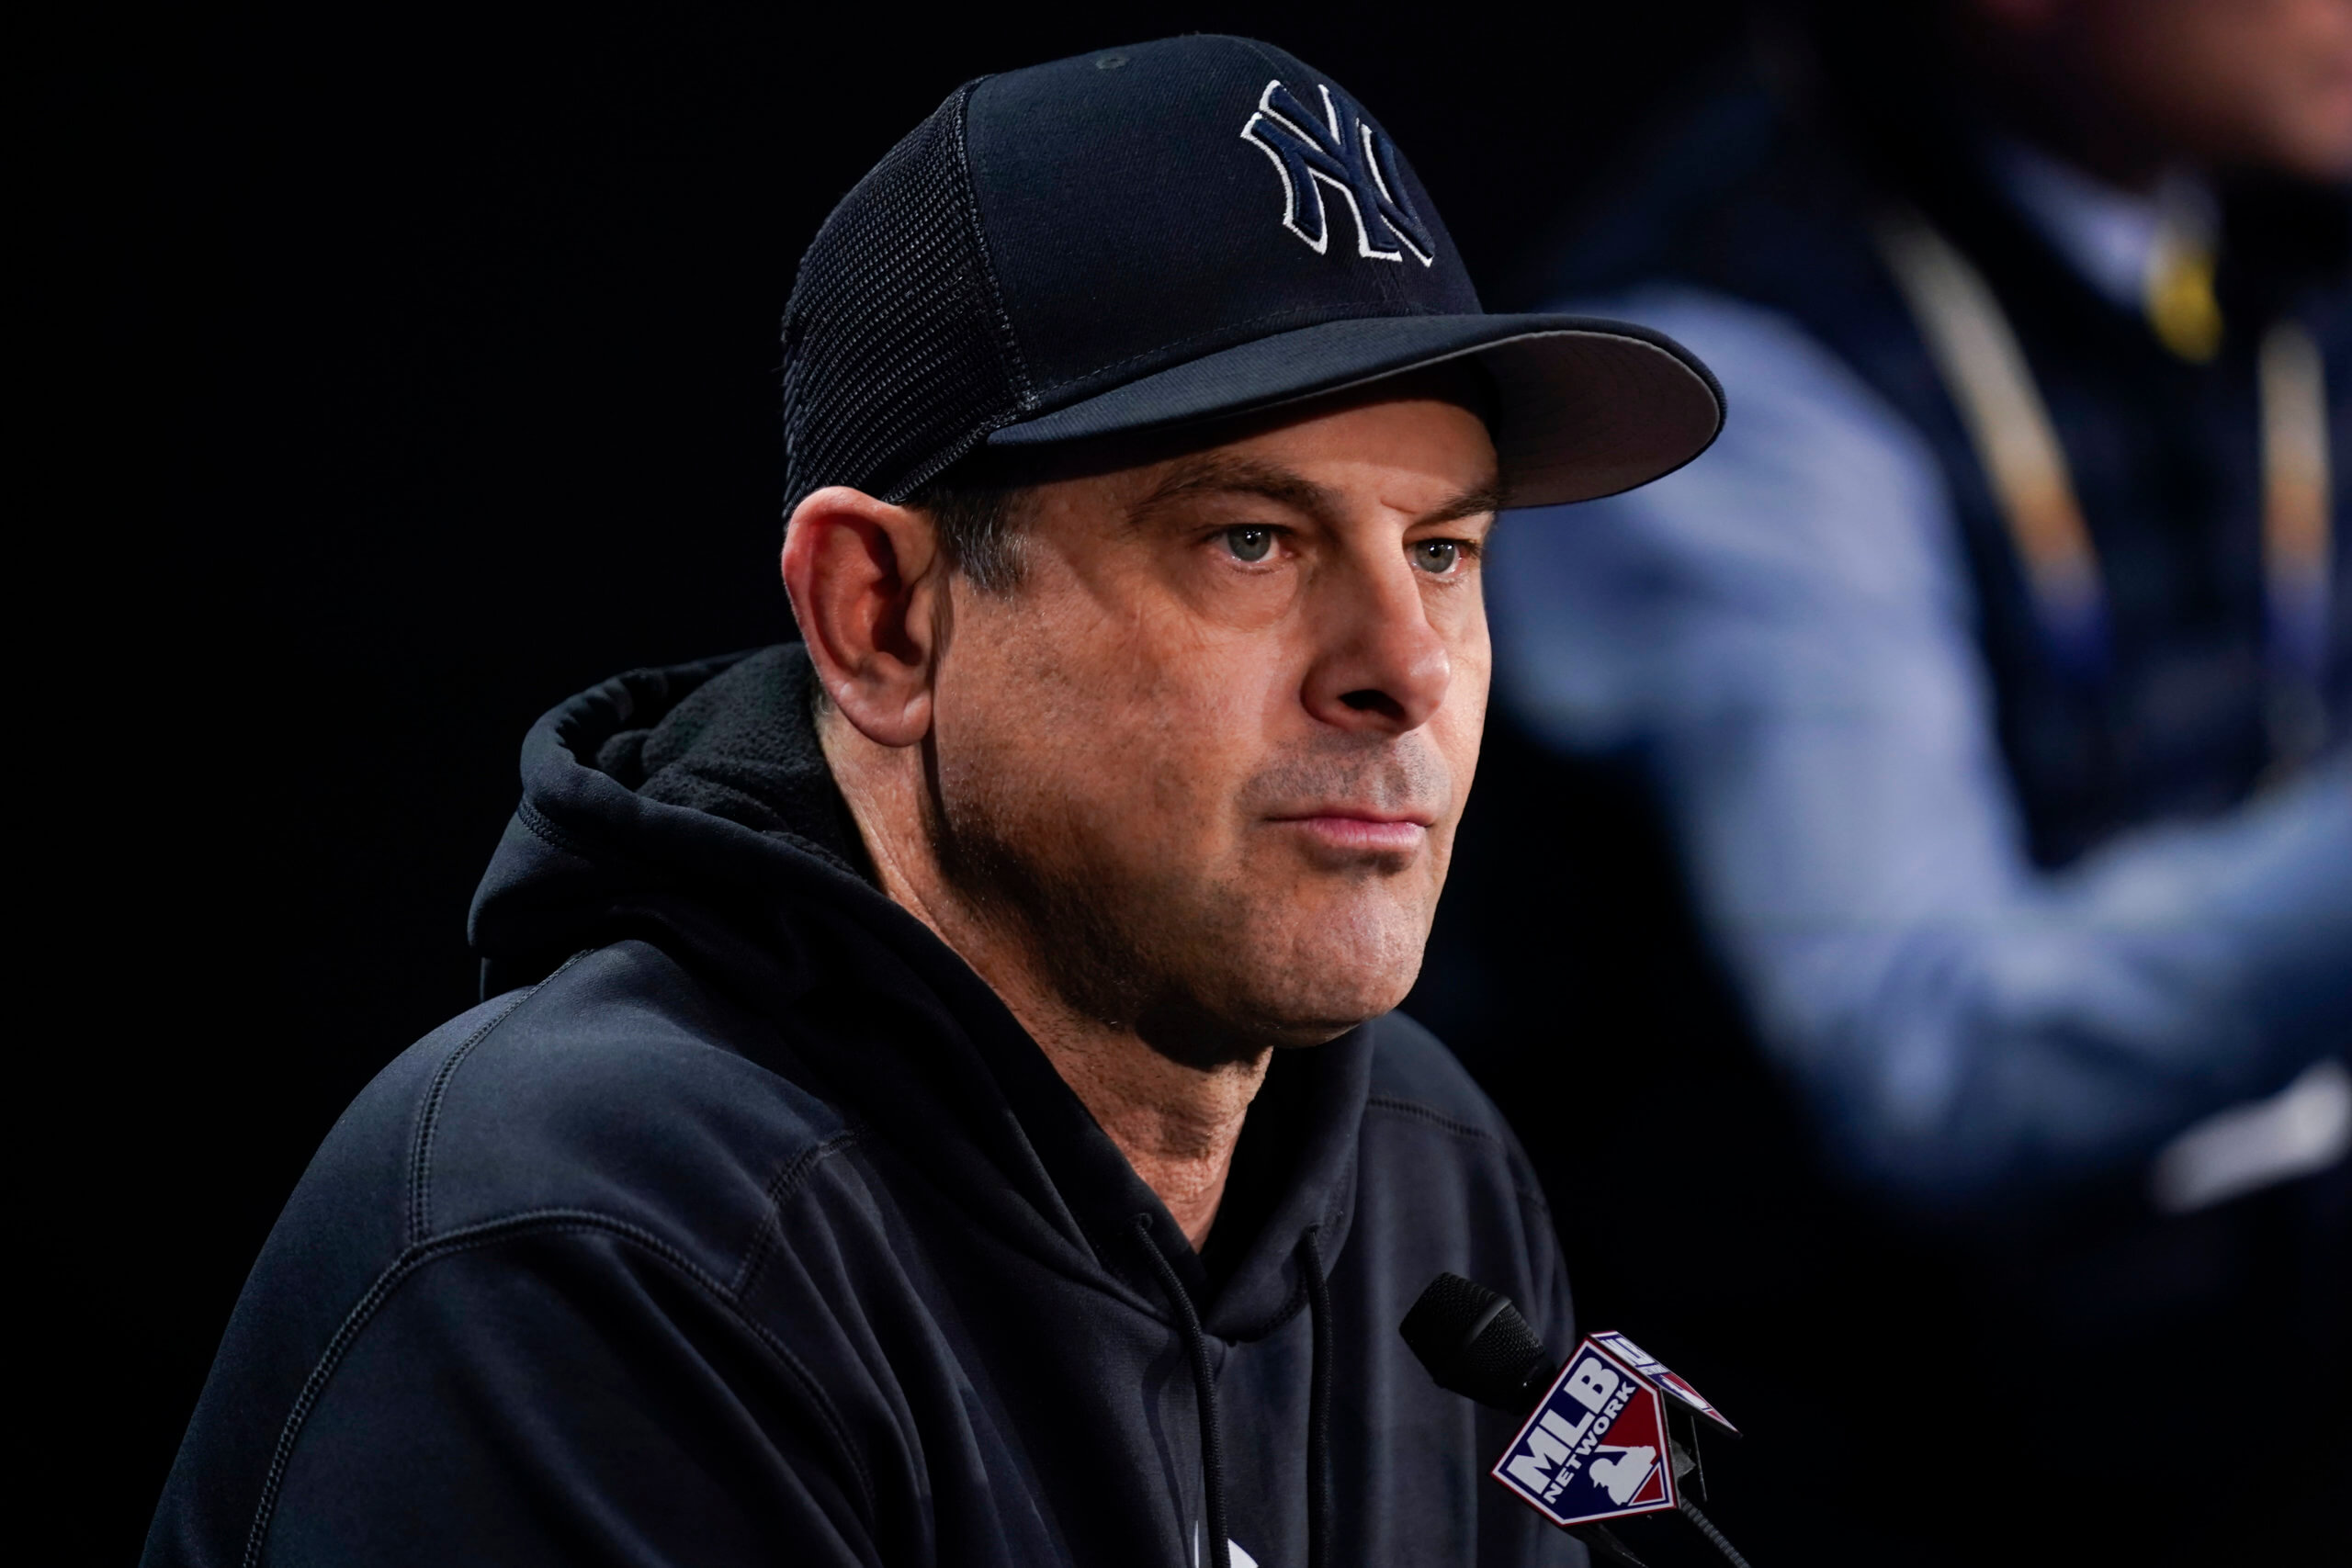 Aaron Boone's No. 17? It's Personal, Not Motivational - The New York Times